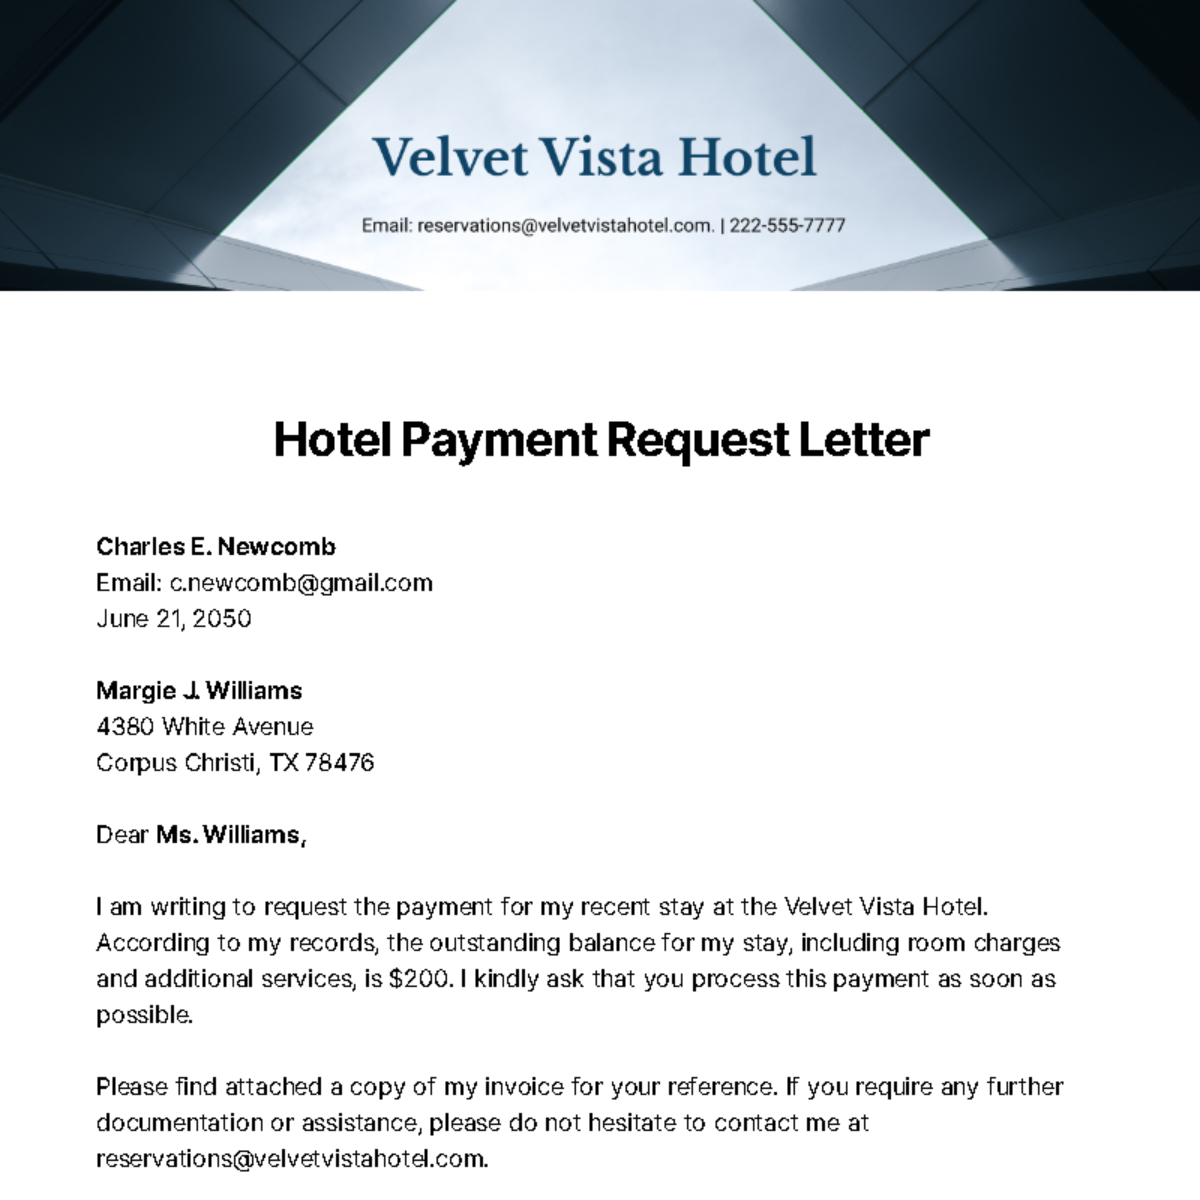 Hotel Payment Request Letter   Template